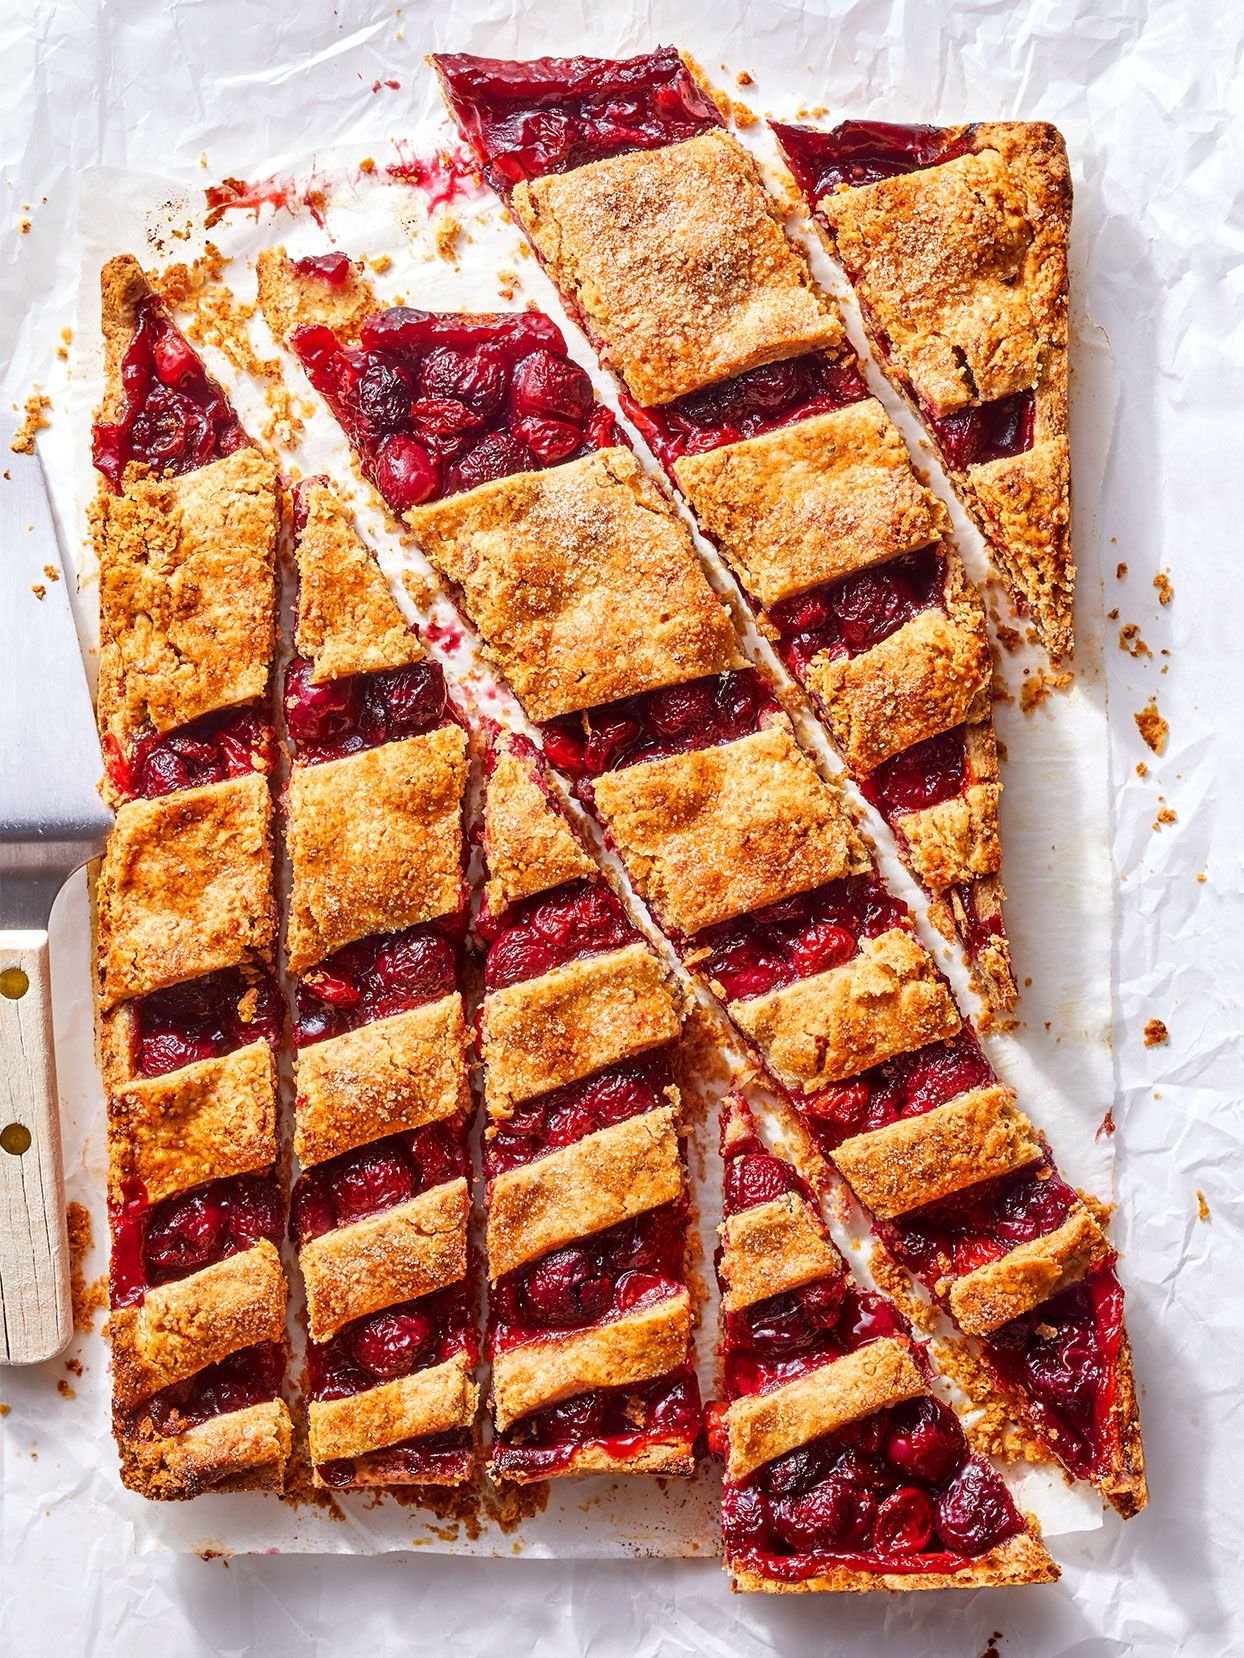 15 Slab Pie Recipes That Are So Much Easier to Make for a Crowd